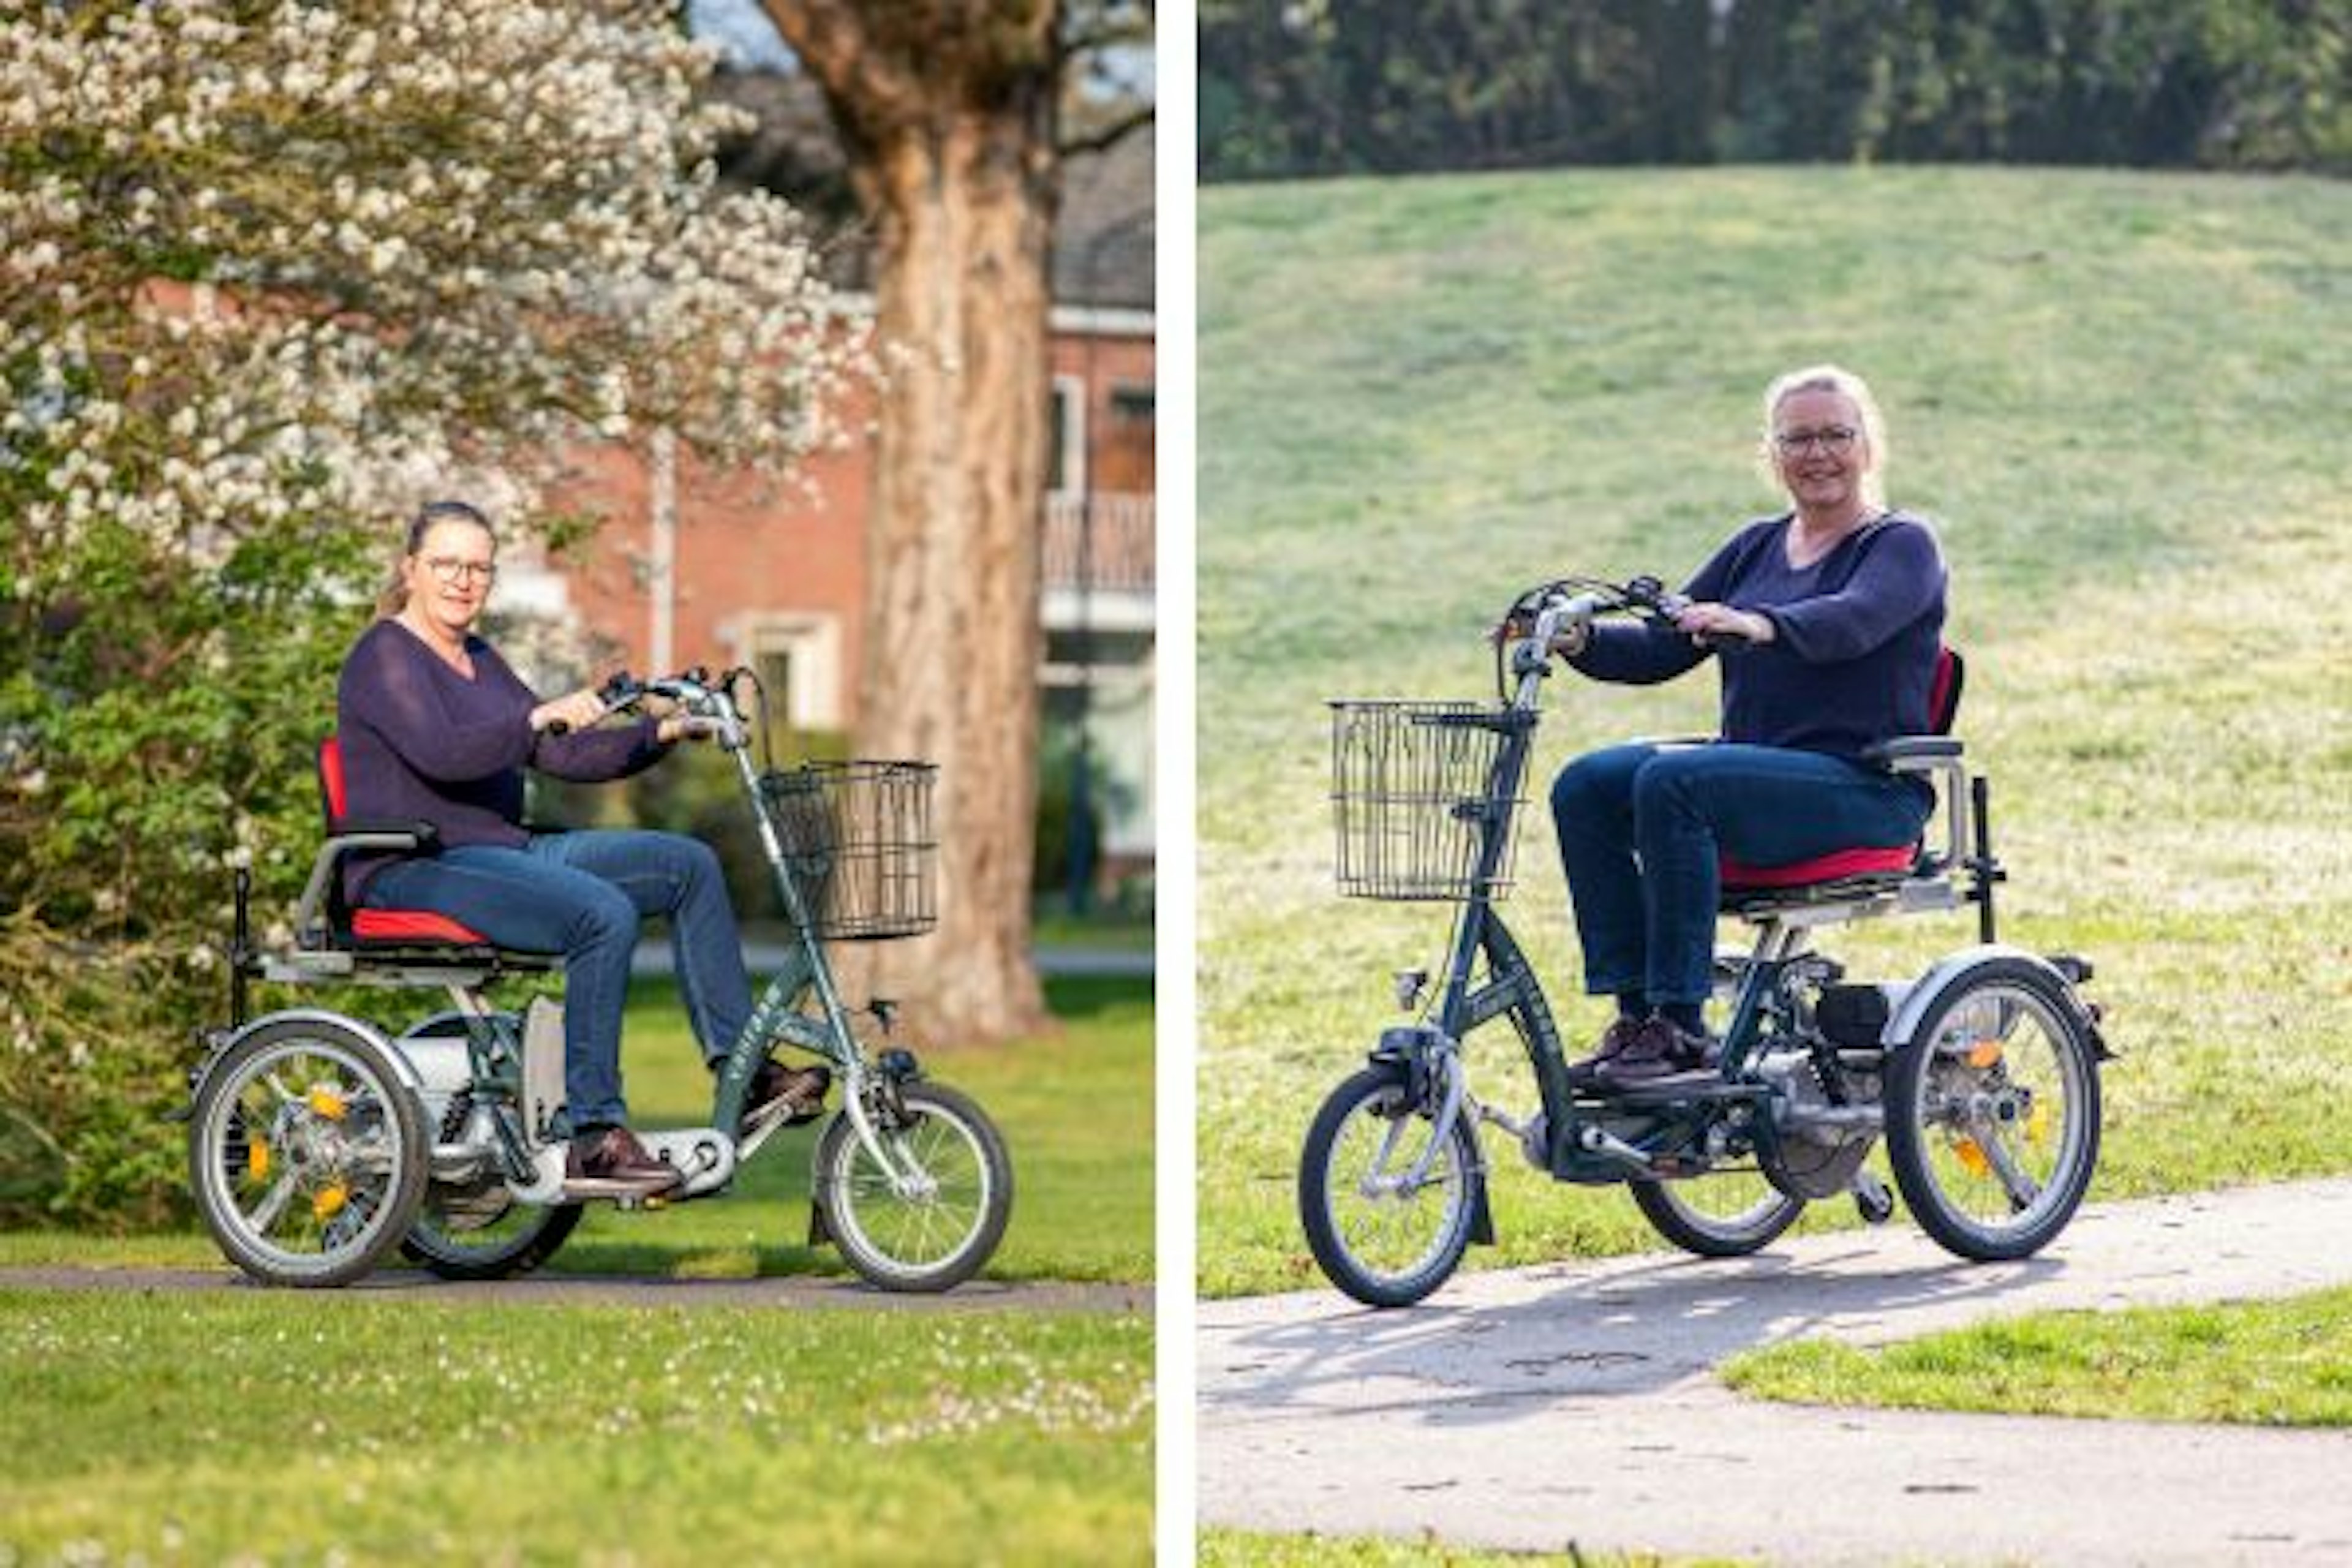 Mobility scooter bike (bike and mobility scooter)